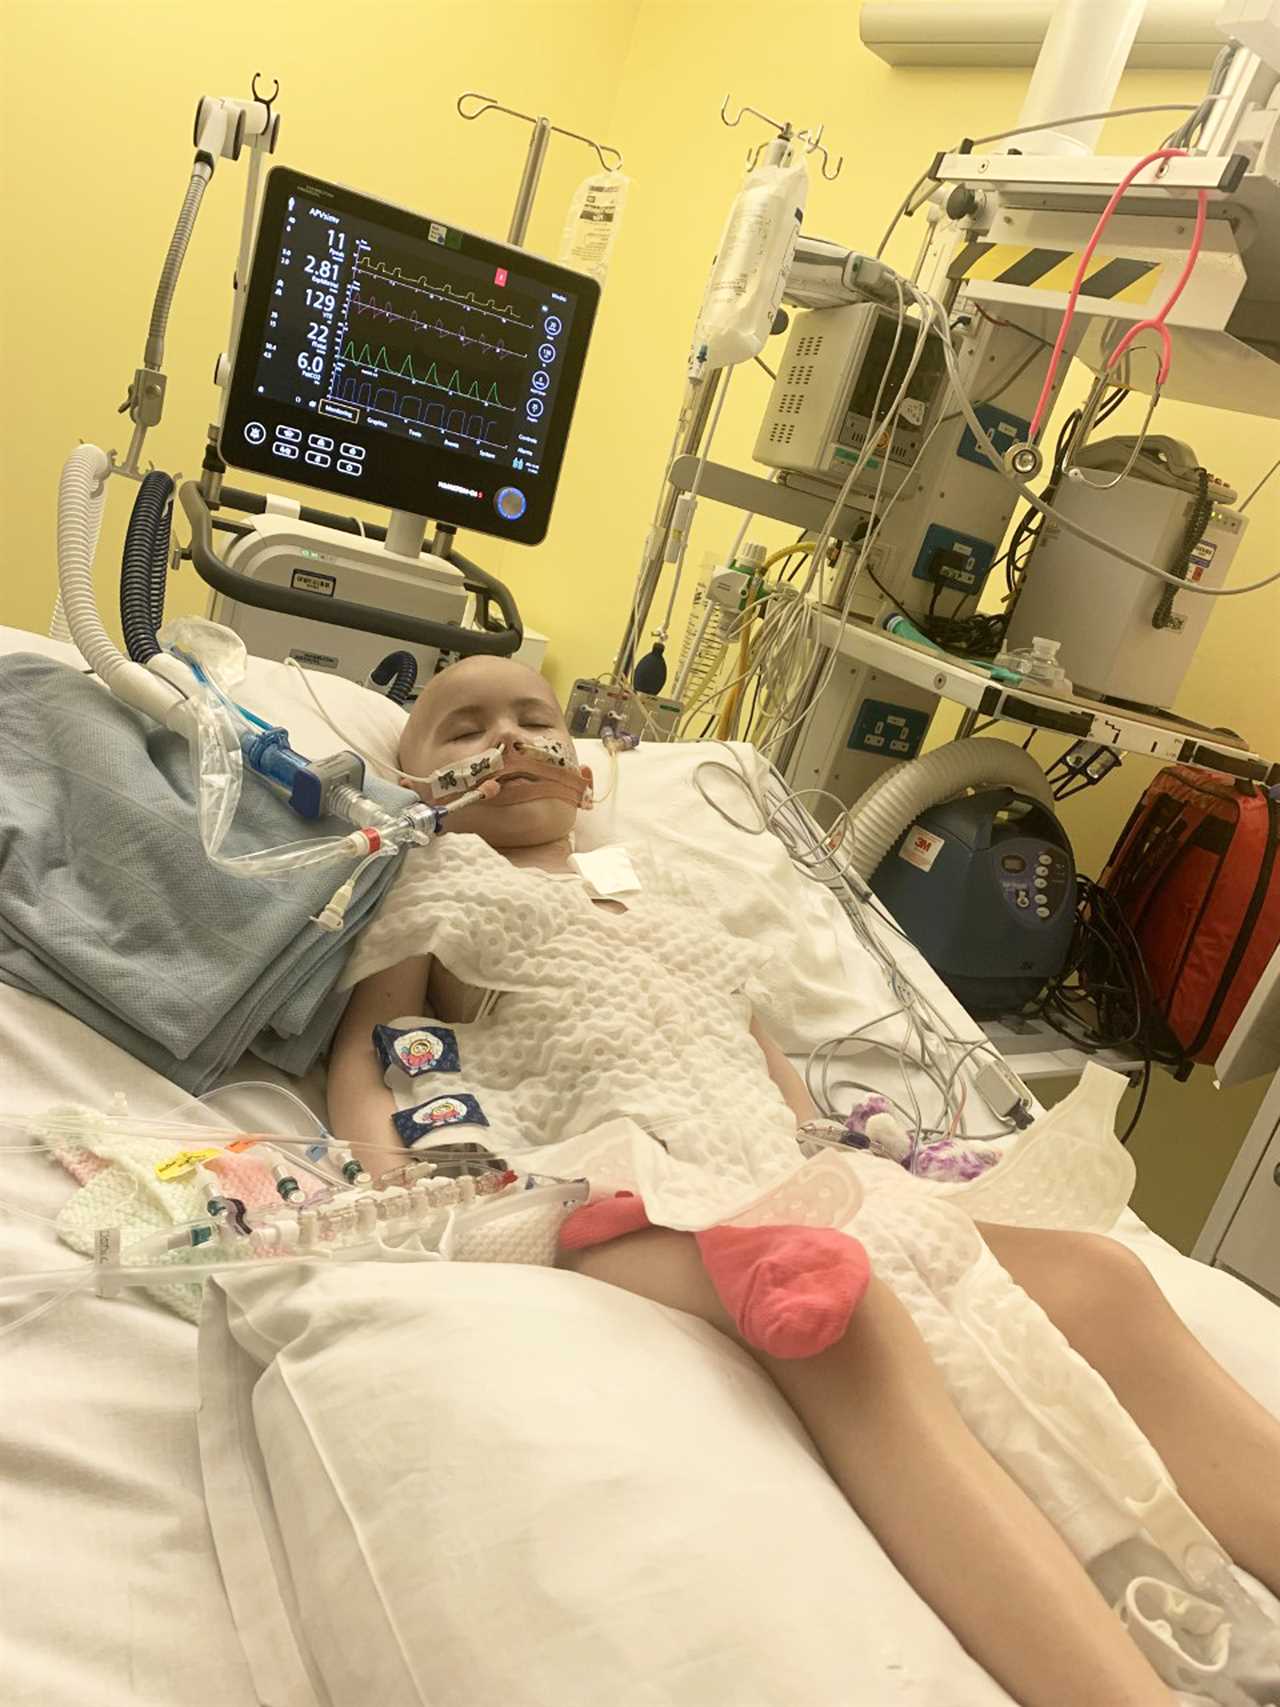 Doctors said my little girl just had growing pains – now she needs life-saving treatment